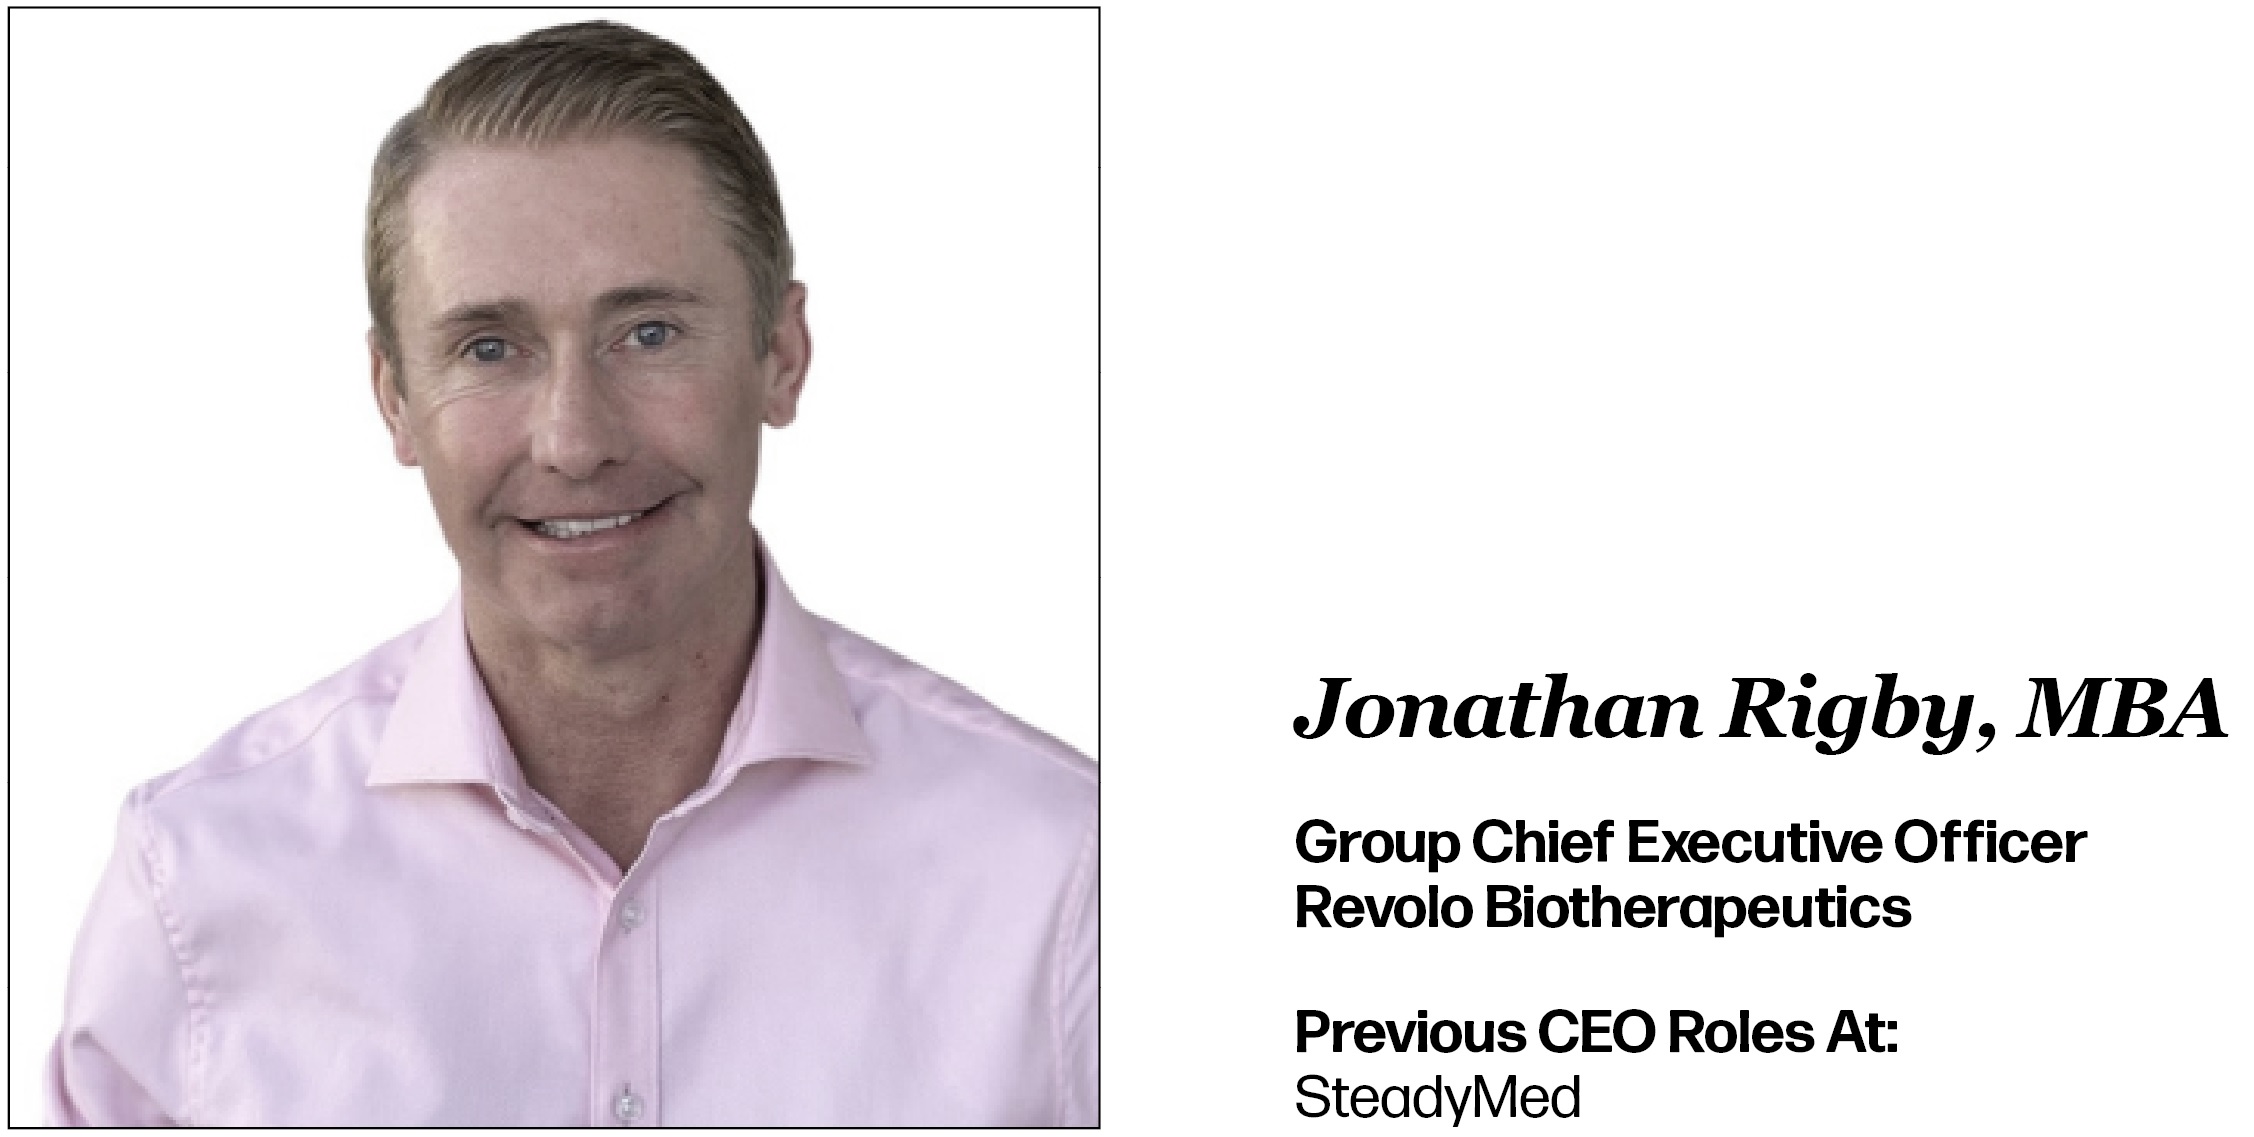 Headshot of Jonathan Rigby, MBA. Lists his current role as Group Chief Executive Officer of Revolo Biotherapeutics. His past CEO role was at SteadyMed.